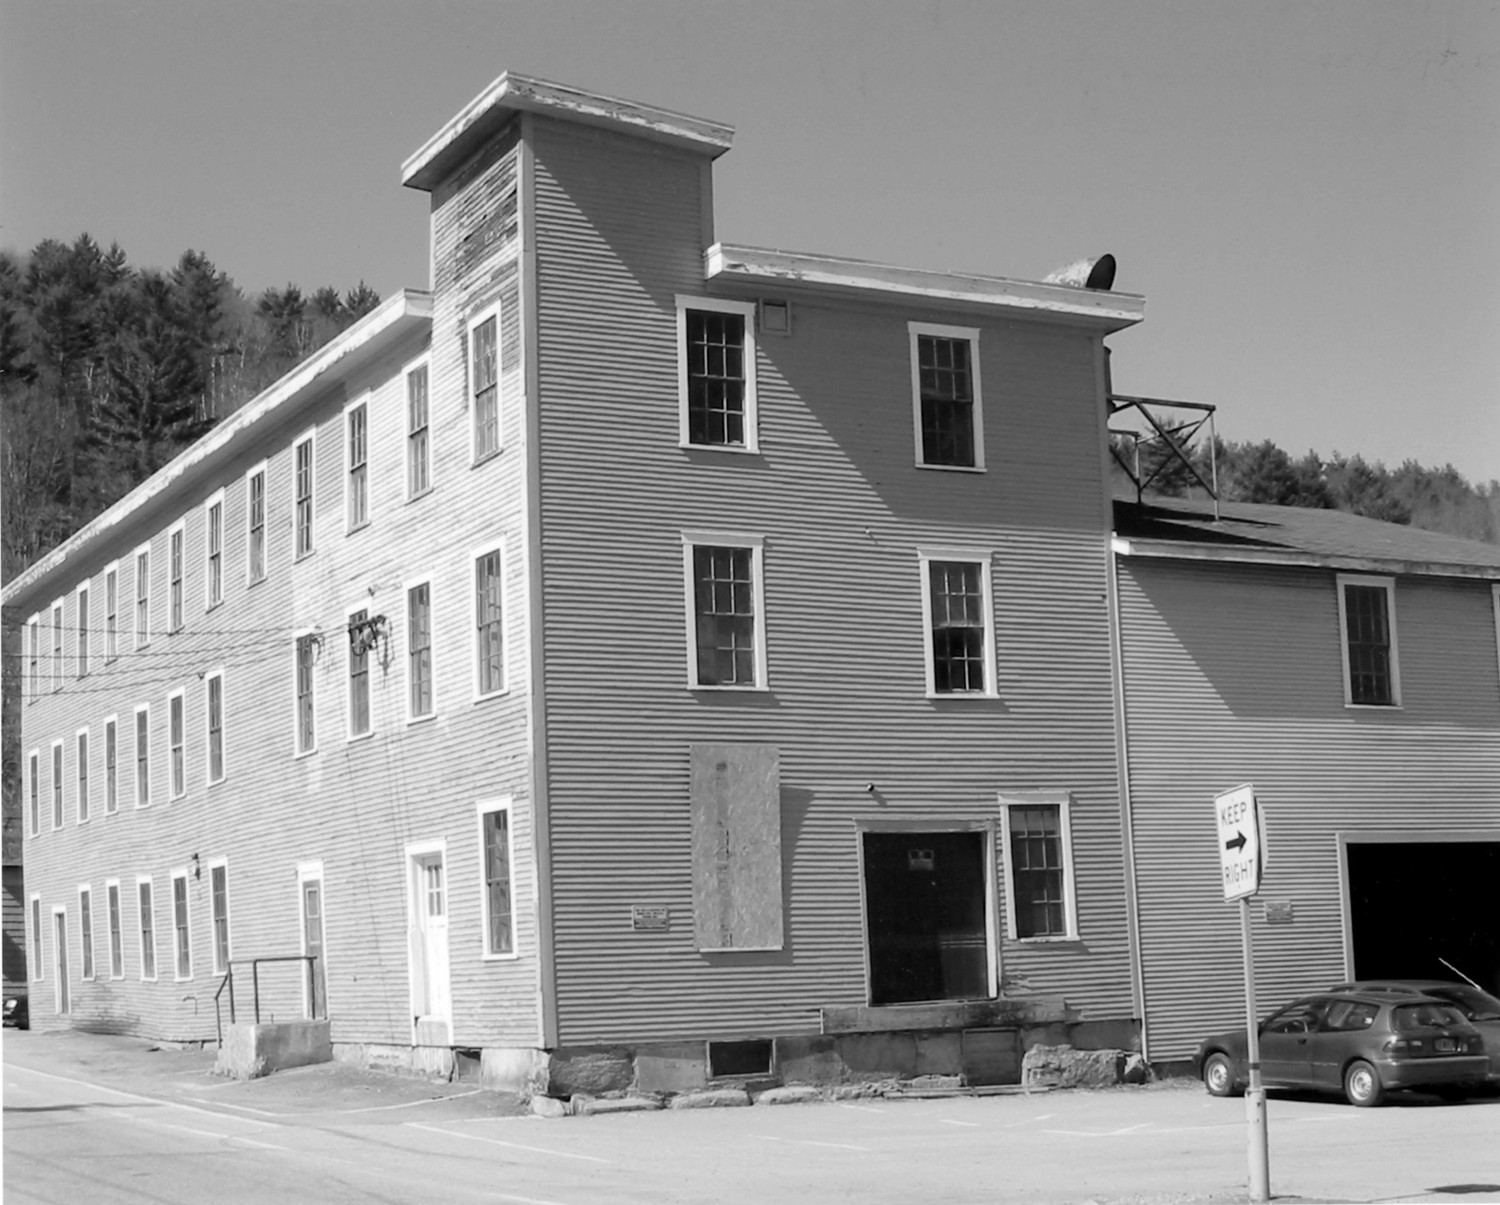 National Clothespin Factory, Montpelier Vermont Looking Southwest (2005)